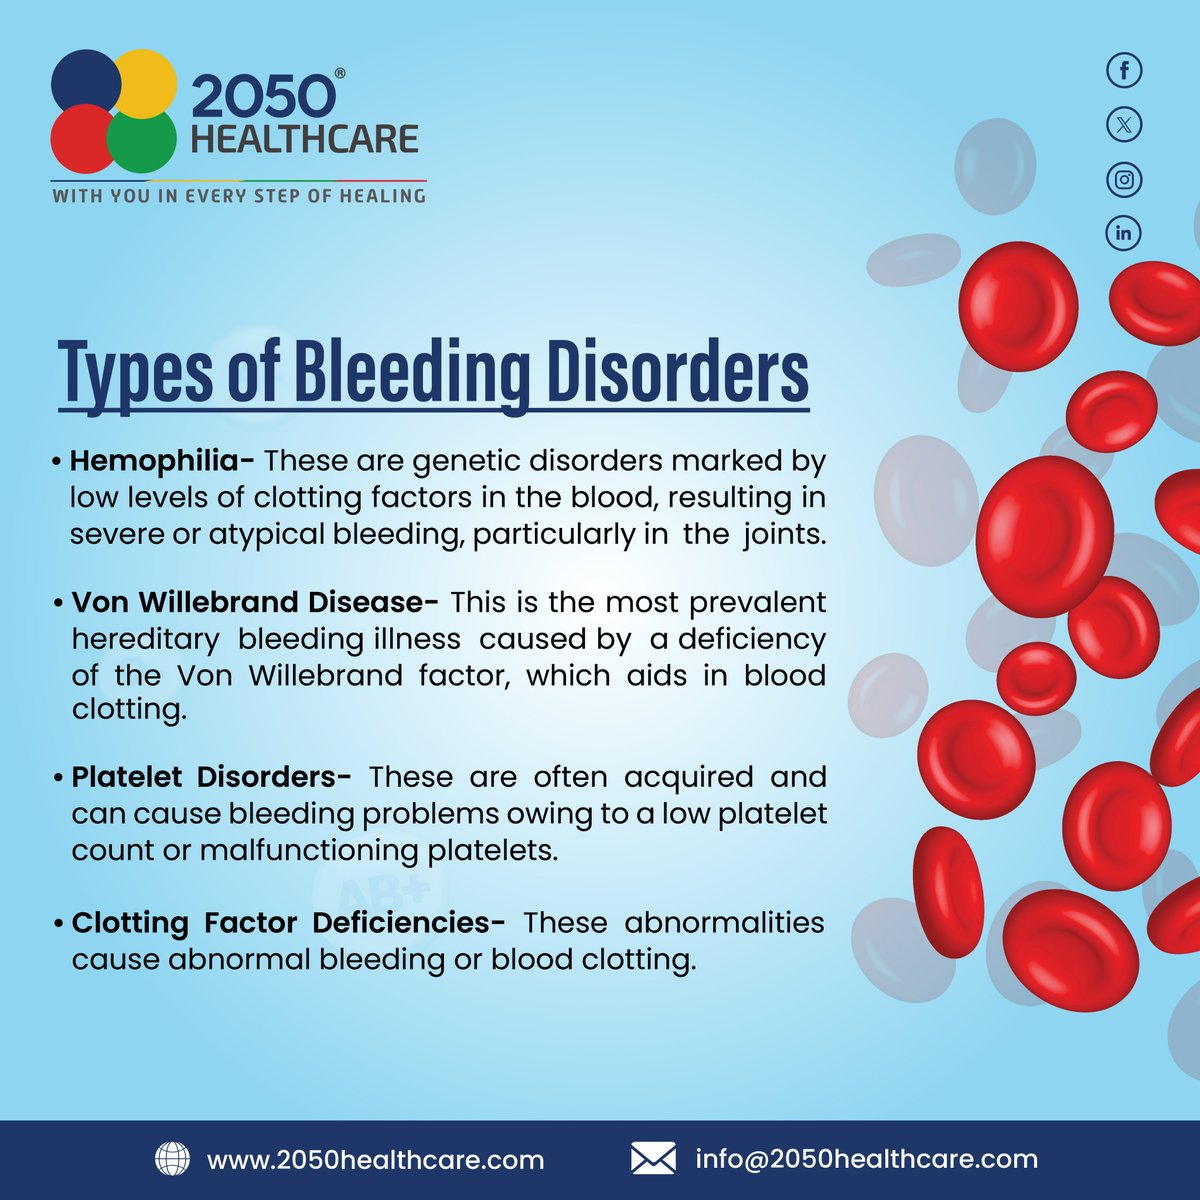 Today is World Hemophilia Day, an opportunity to offer support and raise awareness about bleeding disorders.

Let us join together as a community to educate others.

#WorldHemophiliaDay #2050Healthcare